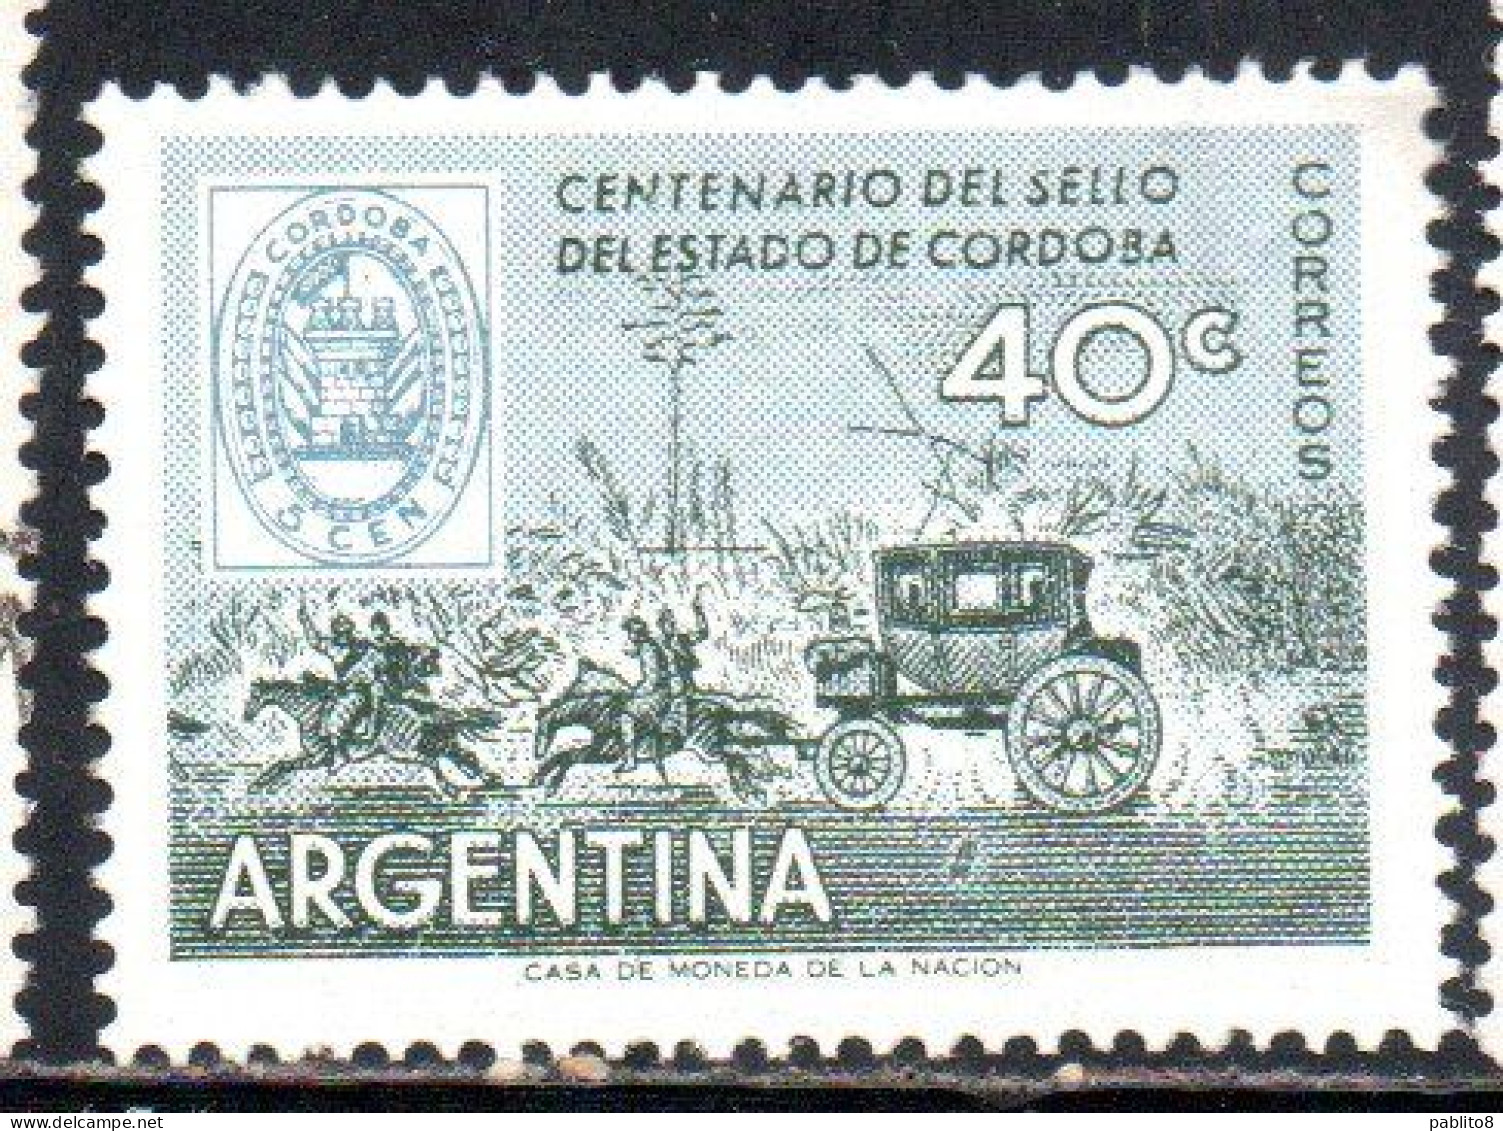 ARGENTINA 1958 CENTENARY OF CORDOBA POSTAGE STAMPS STAMP AND MAIL COACH 40c MNH - Ongebruikt